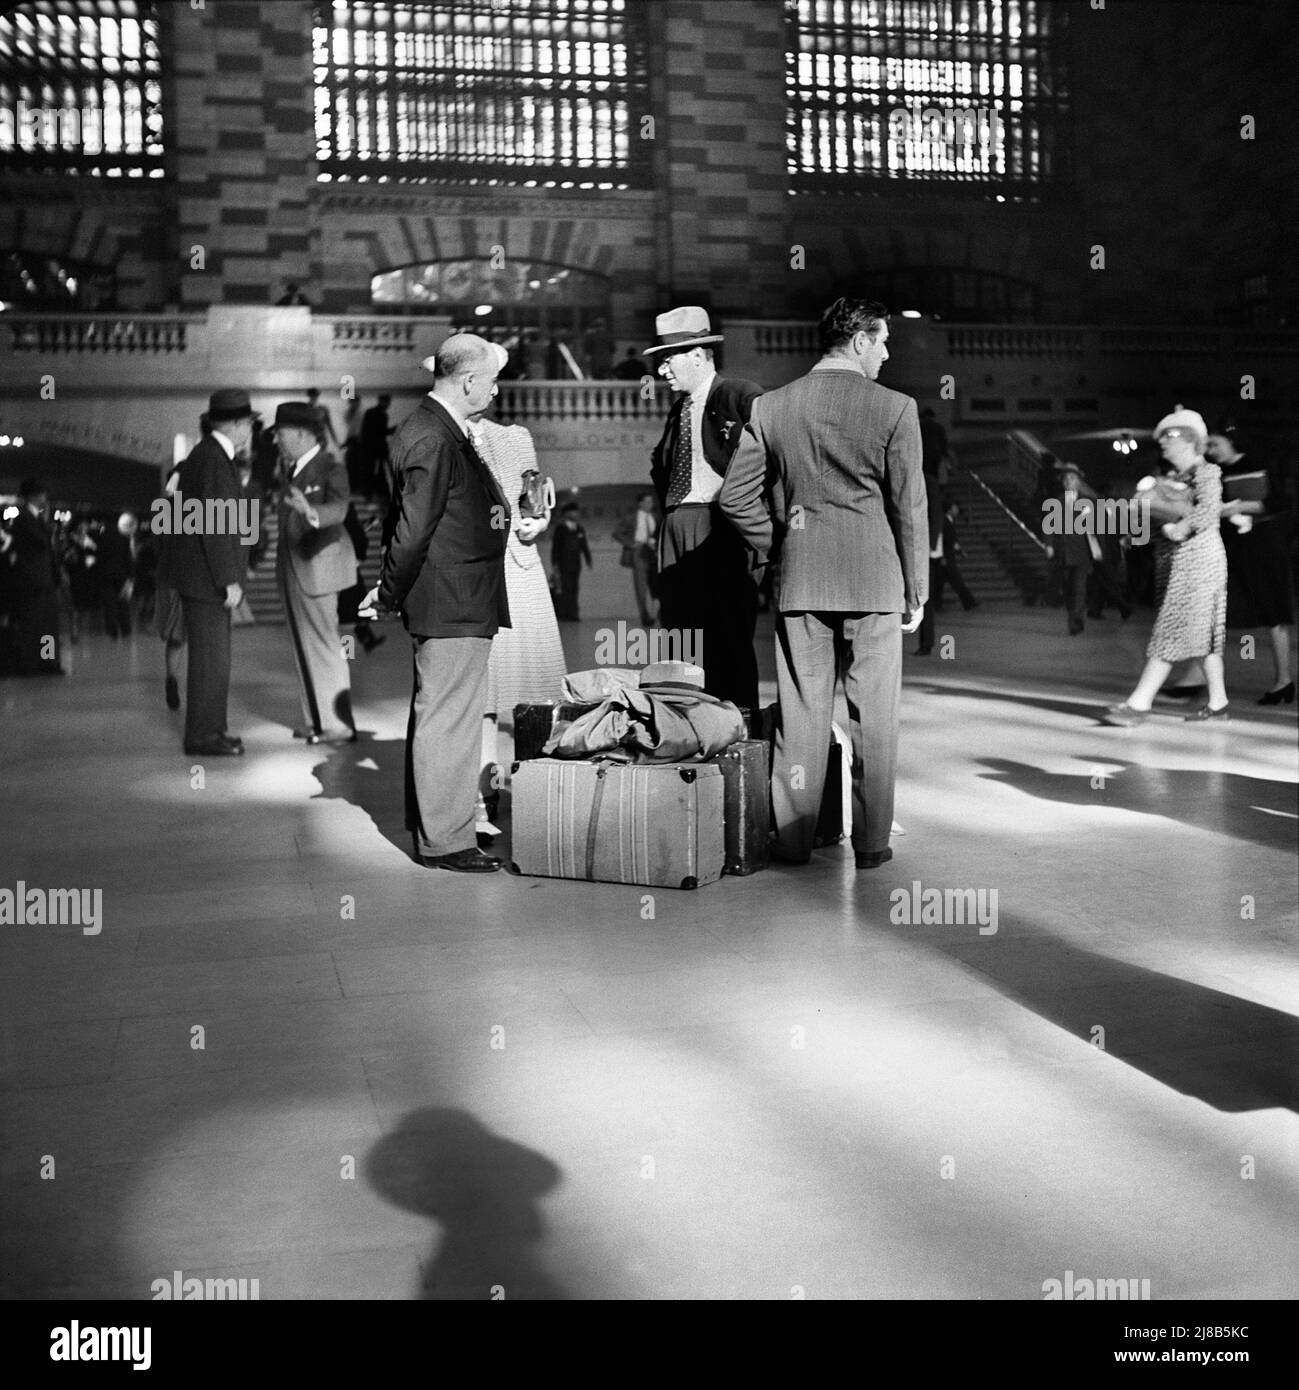 Group of People waiting for Train, Main Concourse, Grand Central Terminal, New York City, New York, USA, John Collier, Jr., U.S. Office of War Information/U.S. Farm Security Administration, October 1941 Stock Photo